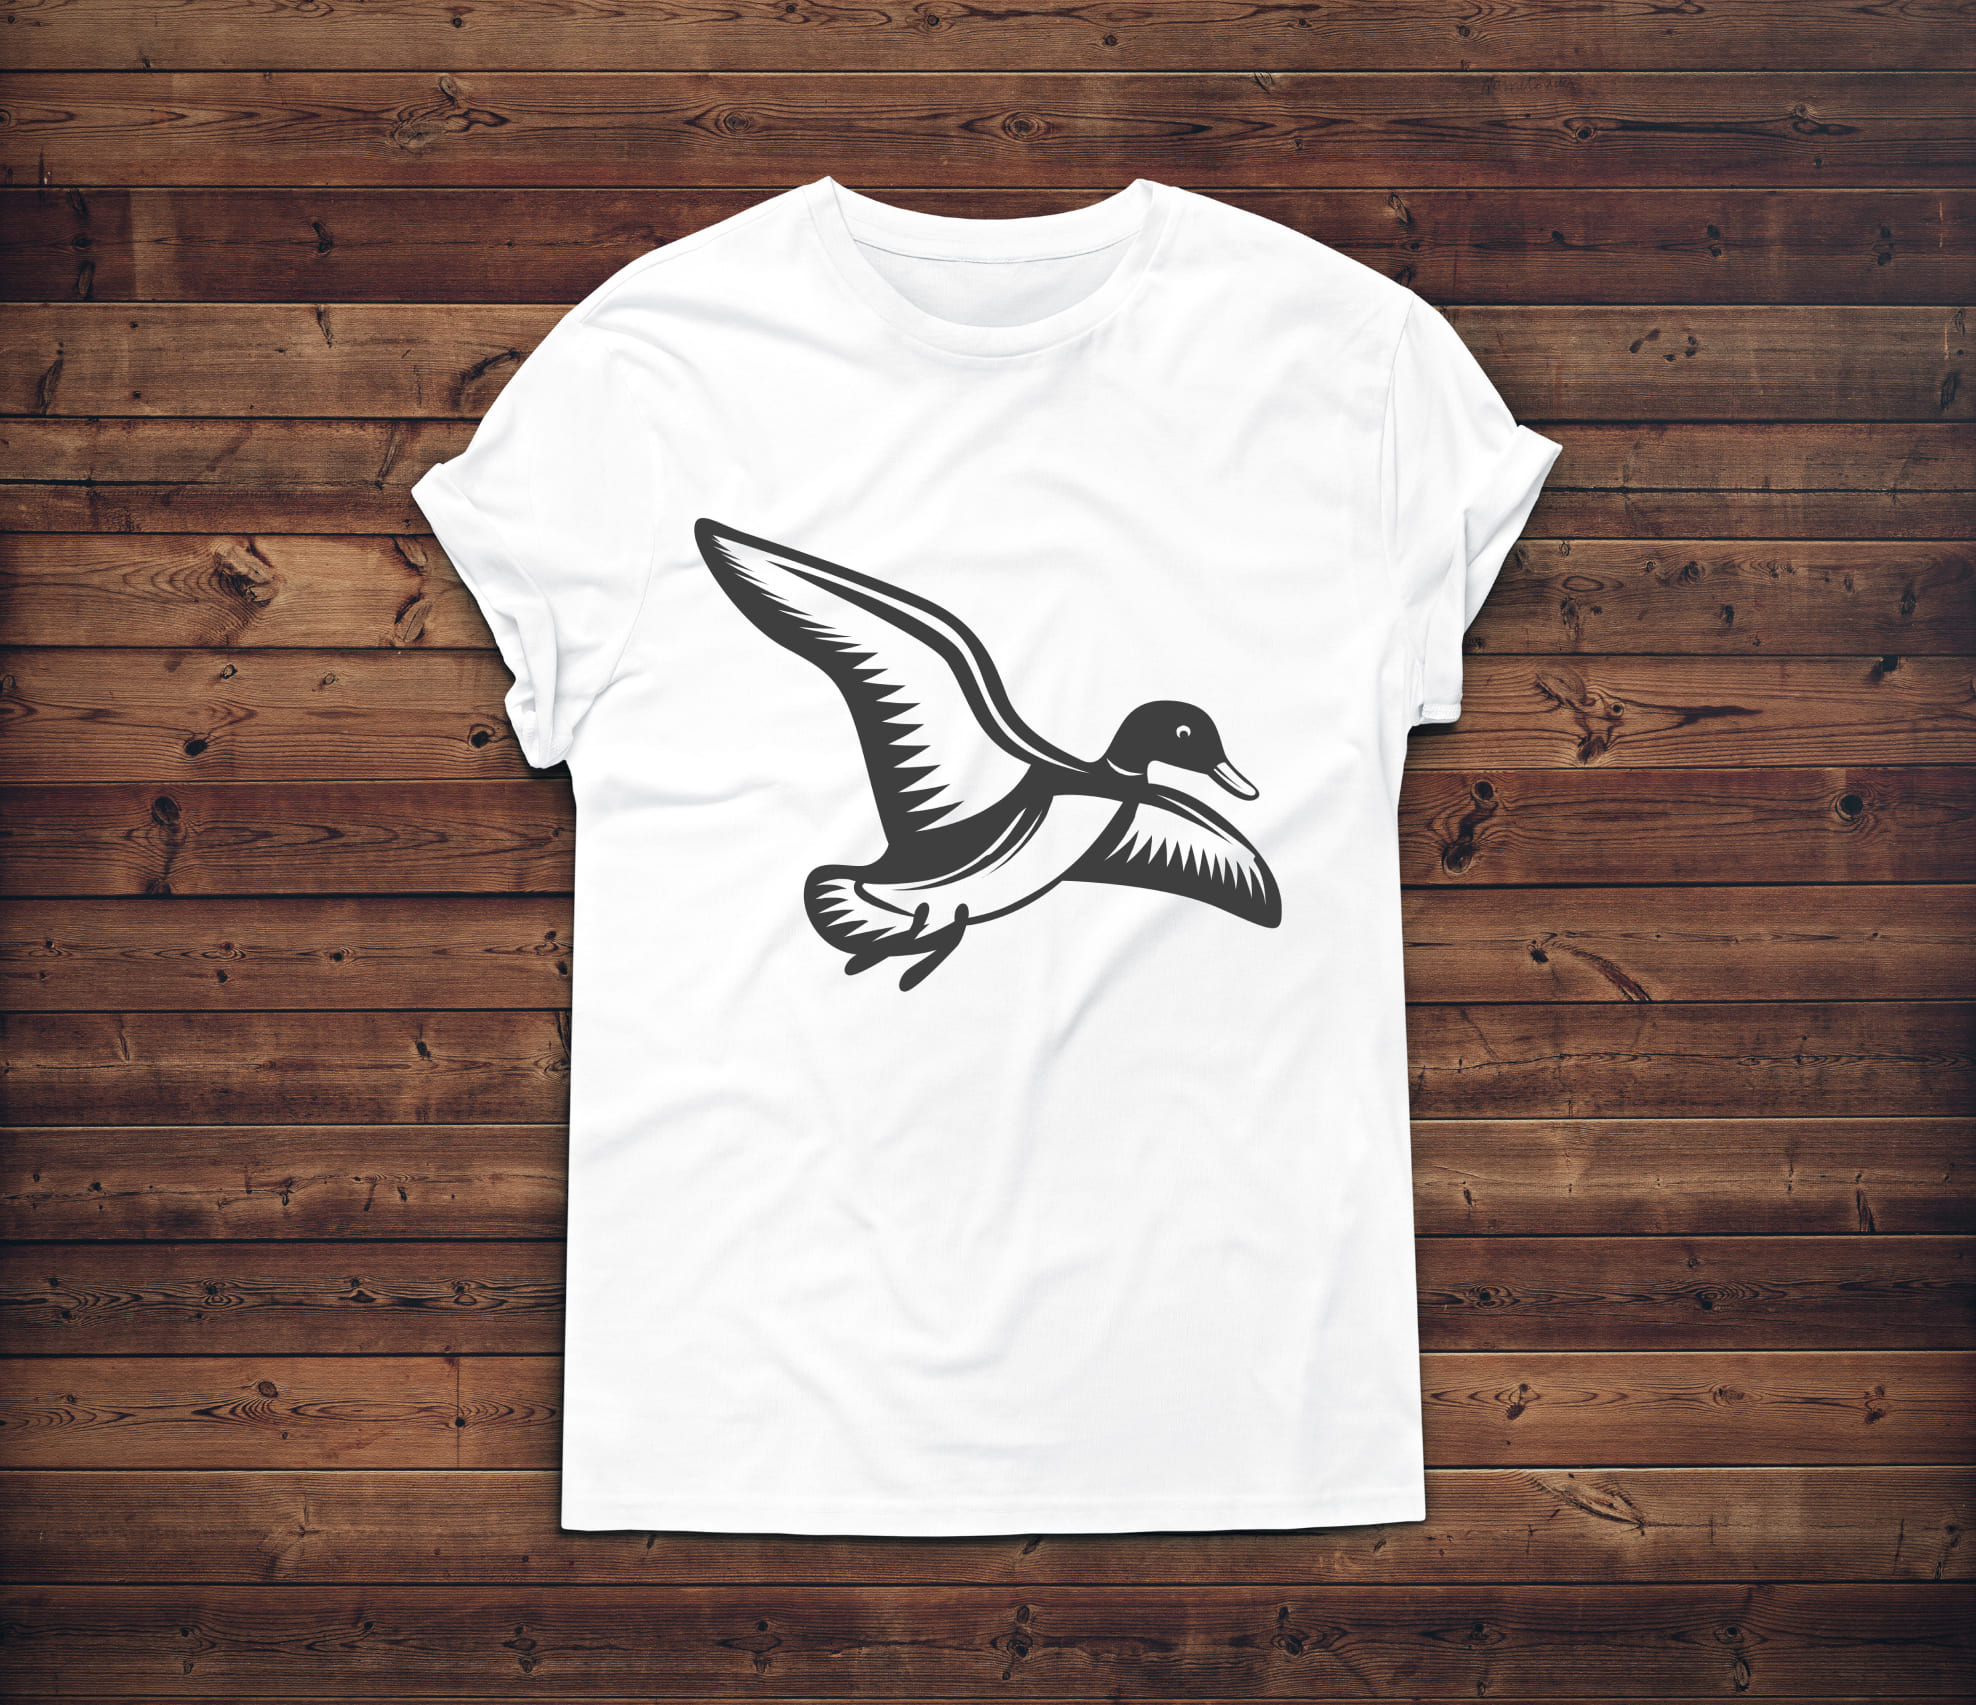 Picture of a white t-shirt with an adorable duck silhouette print.